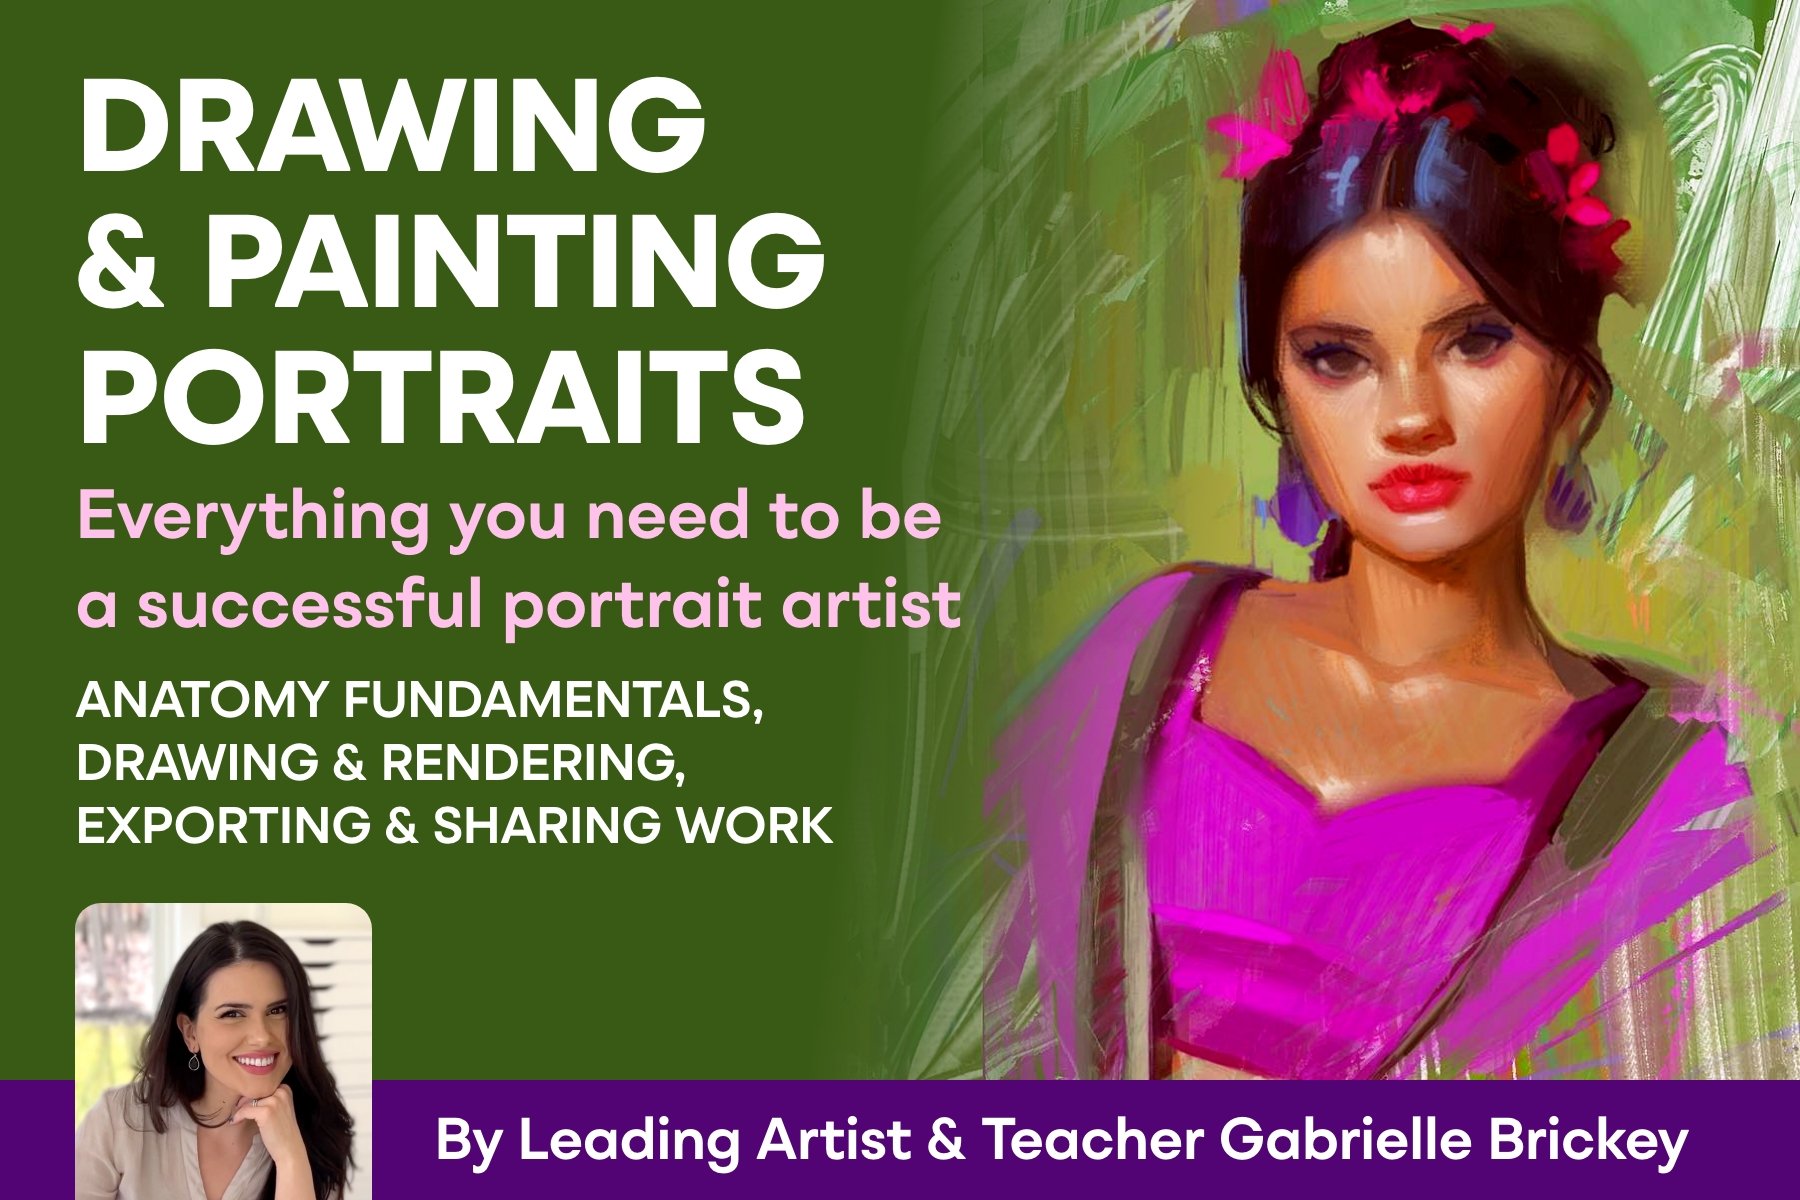 Drawing & Painting Portraits: A Guide For Artists